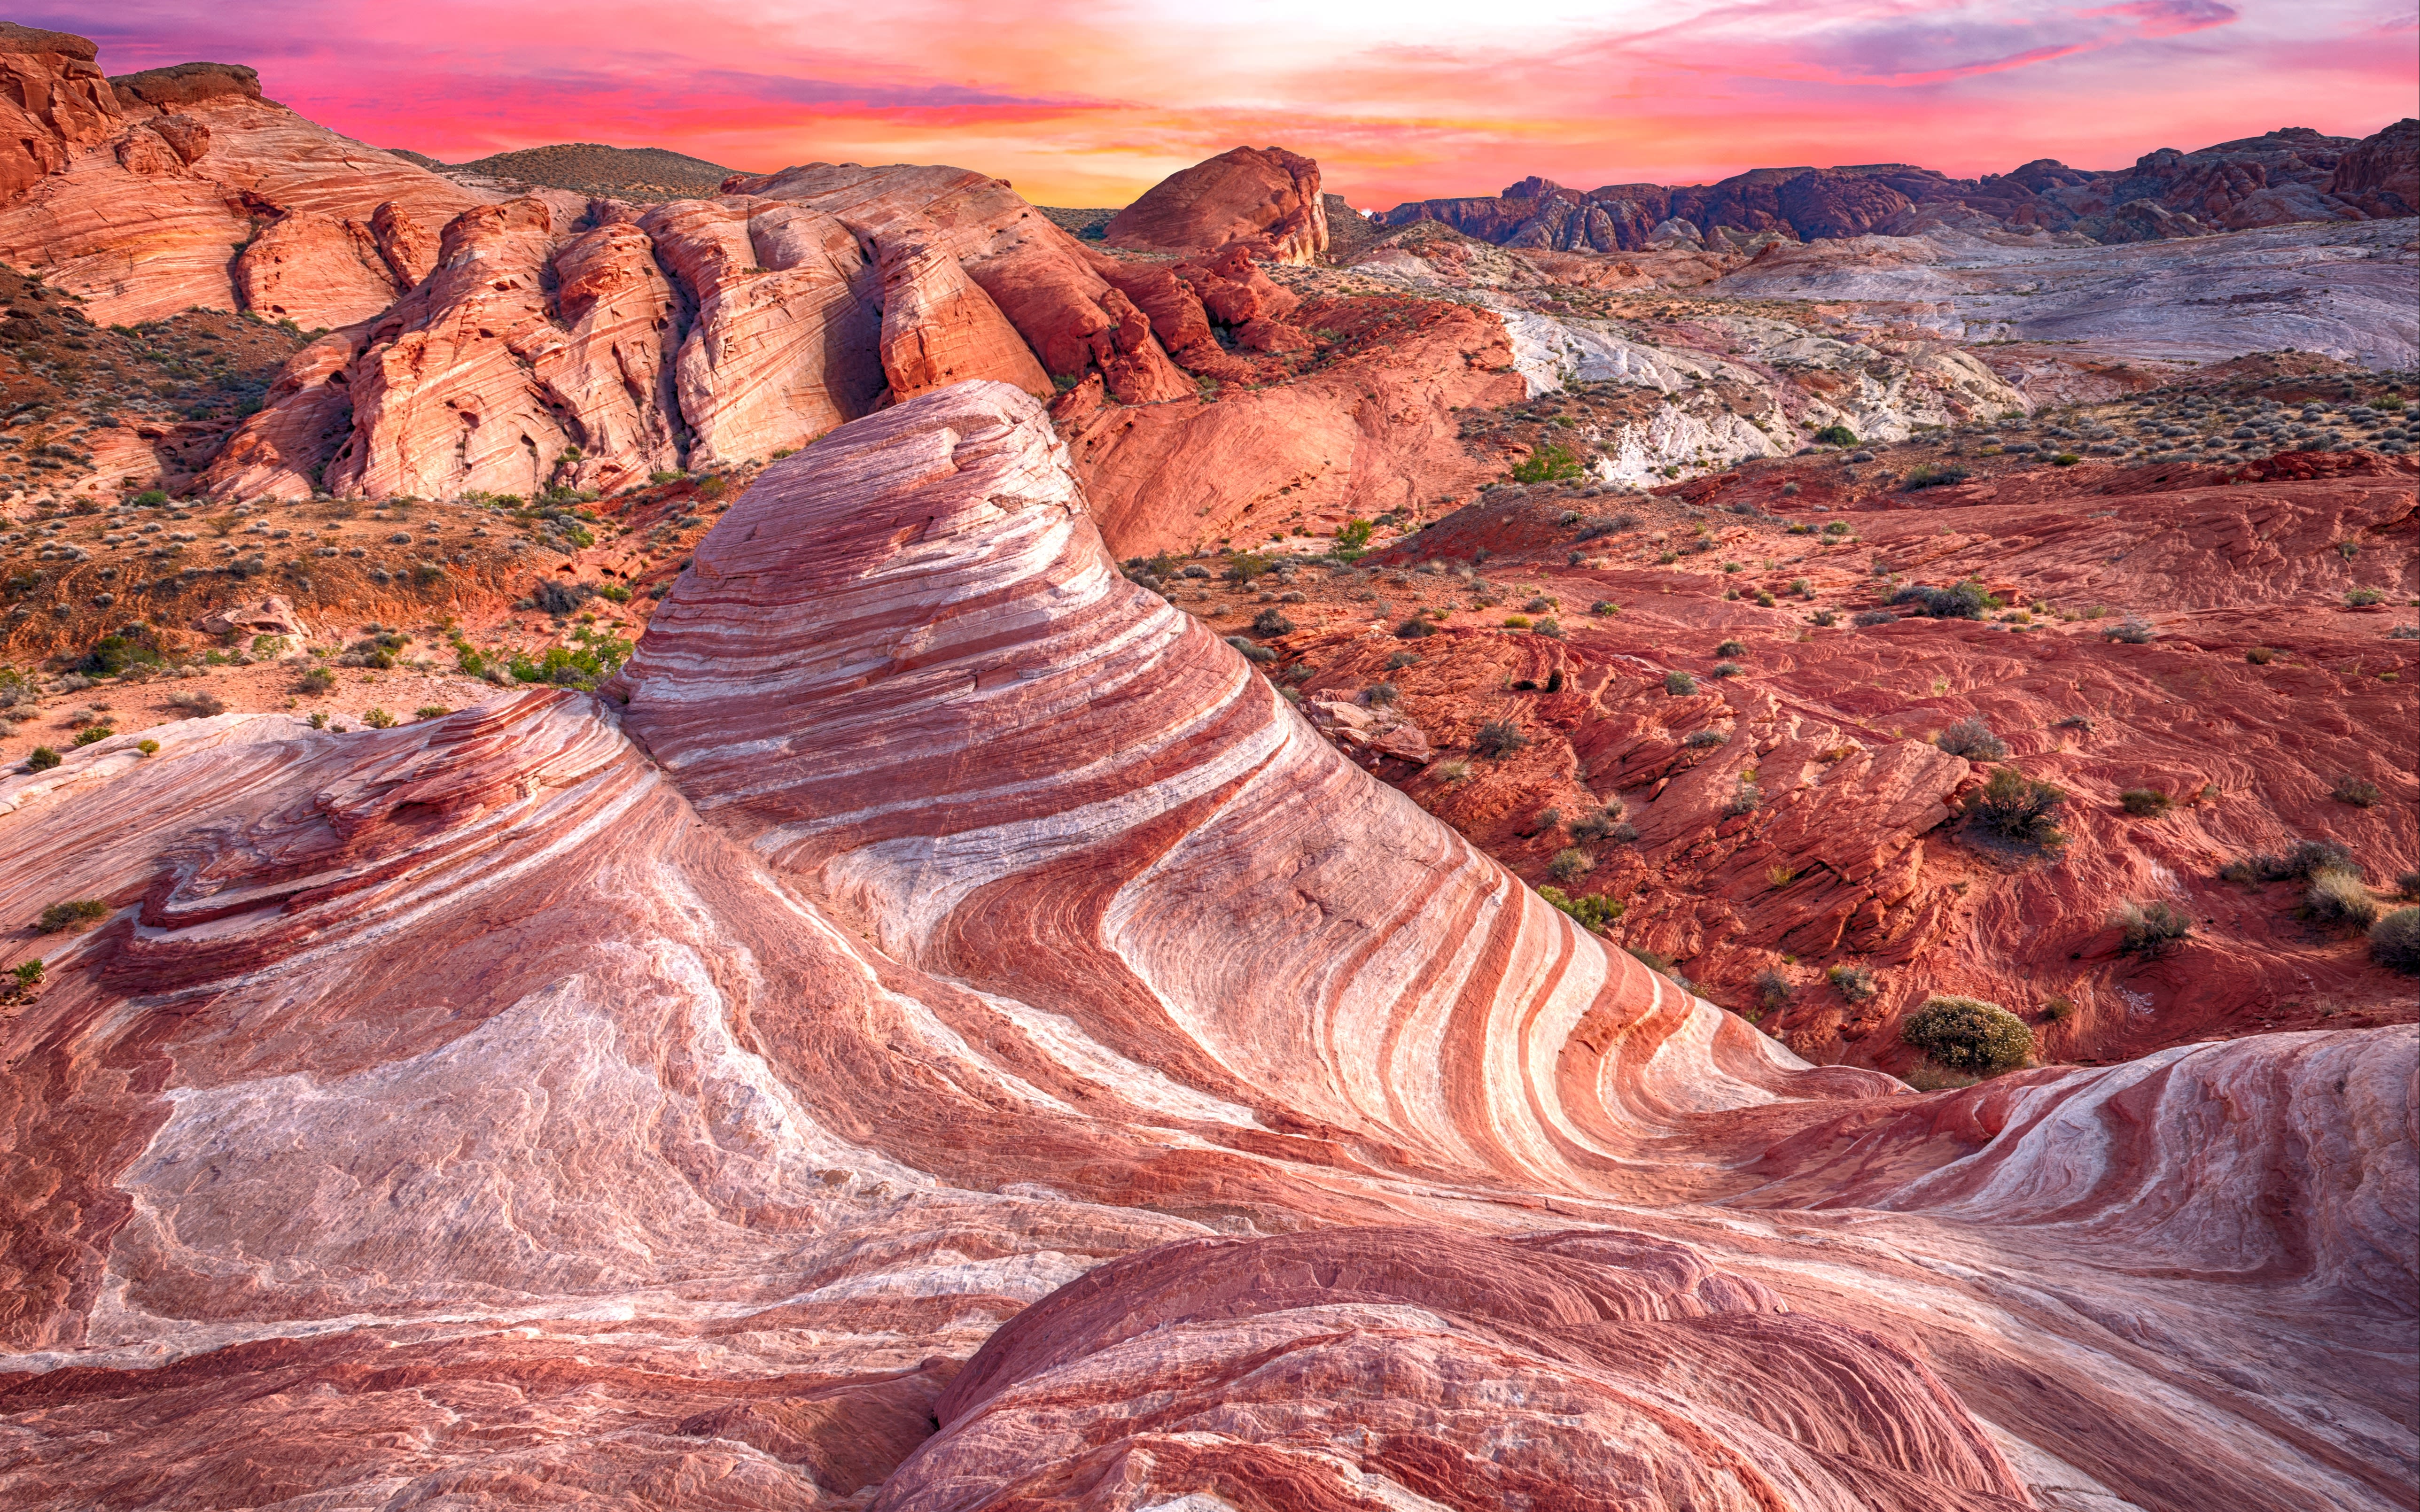 An image of the Valley of Fire State Park in Nevada